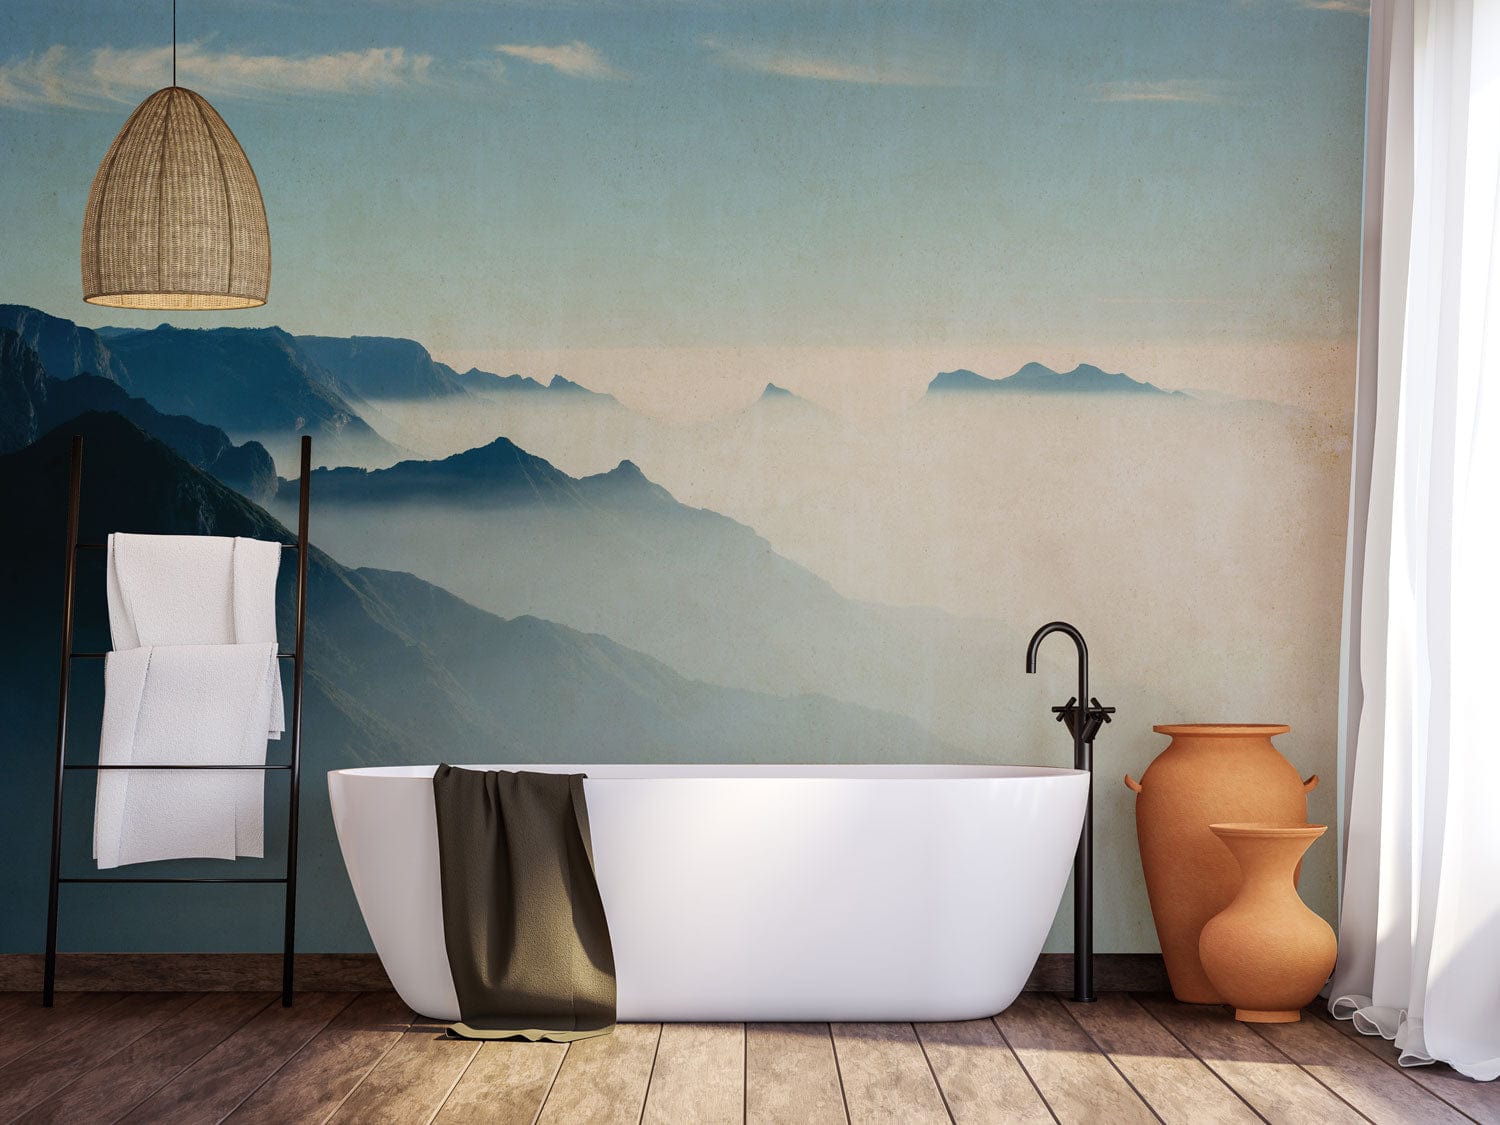 Wallpaper Mural for Bathroom Decoration Featuring the Scenery of Sea of Clouds at Peak Landscapes